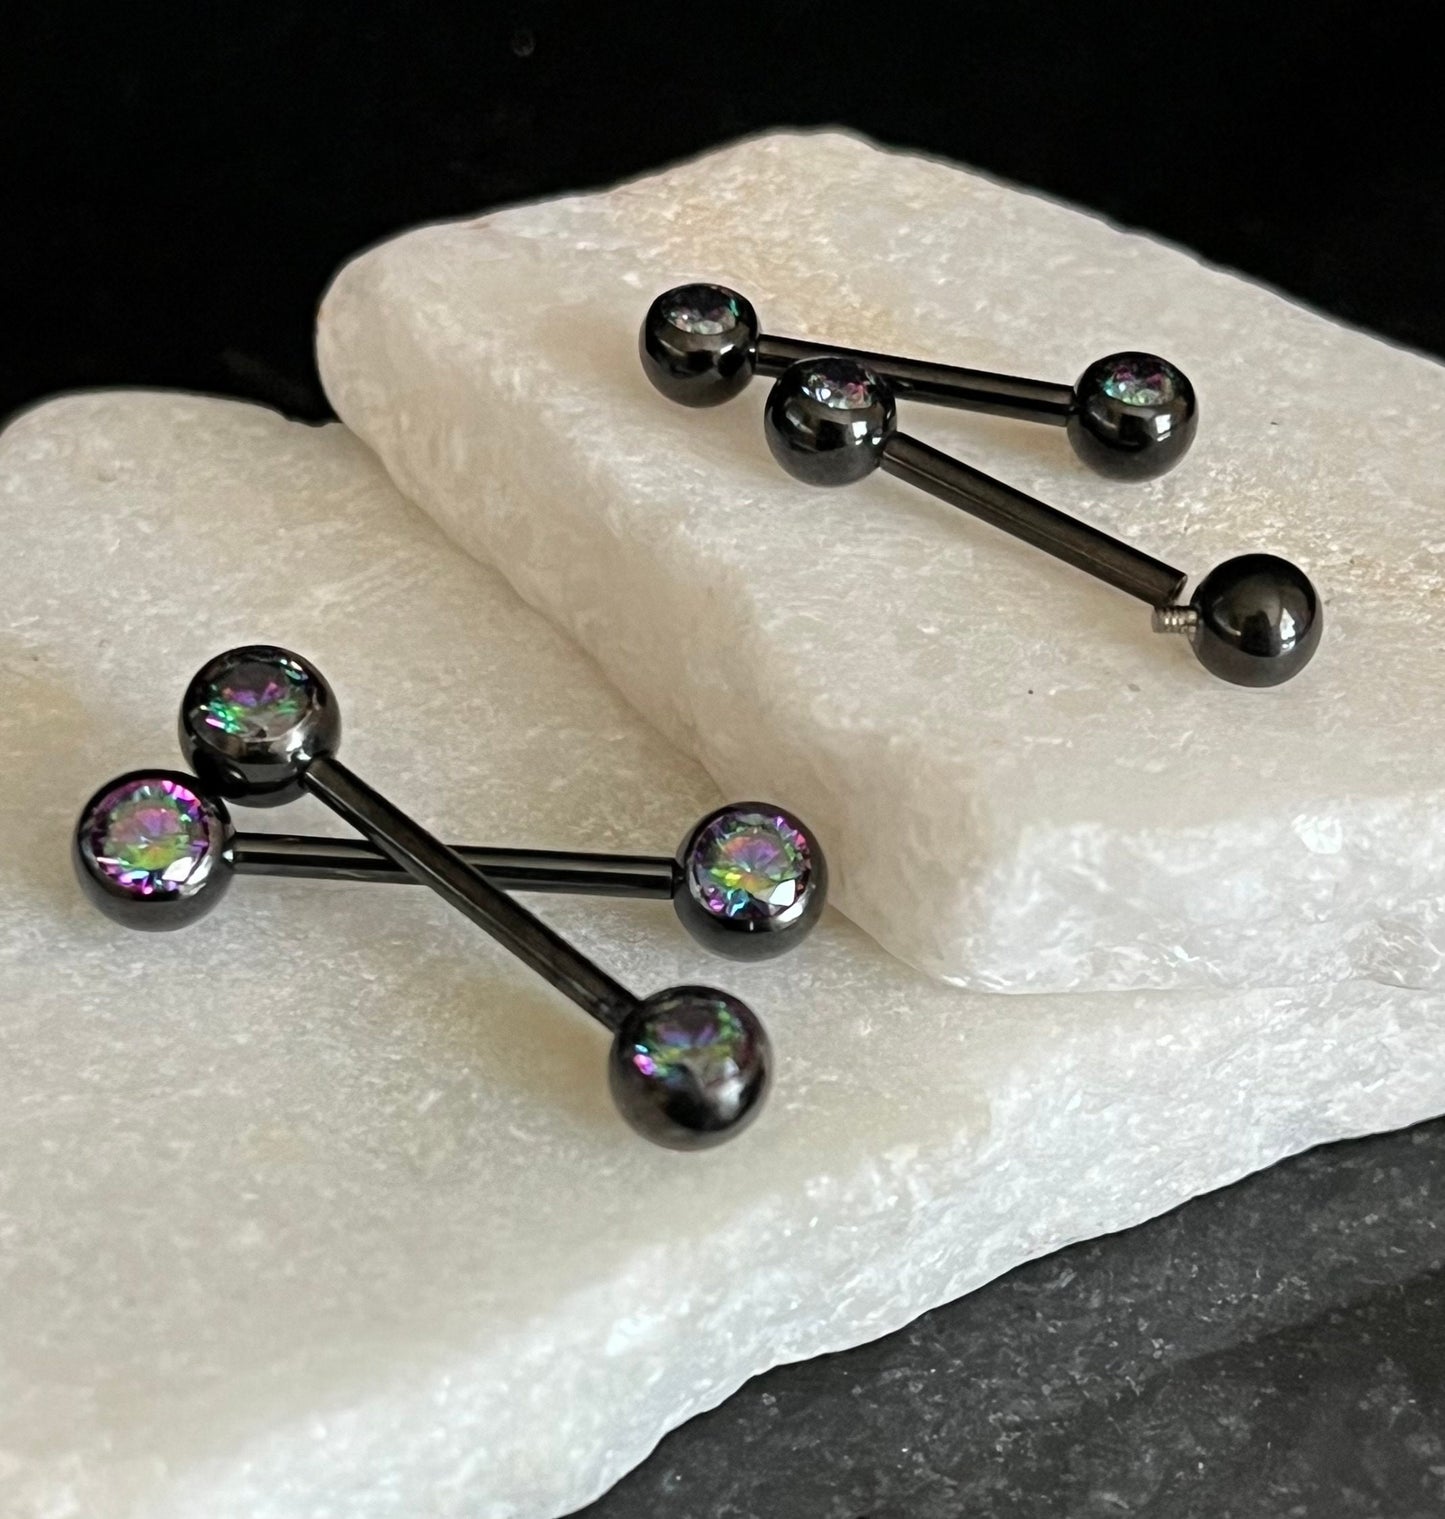 PAIR of Stunning Implant Grade Titanium Front CZ Gem Internally Threaded Industrial Barbell Rings - 14g - Length 12mm or 16mm Available!